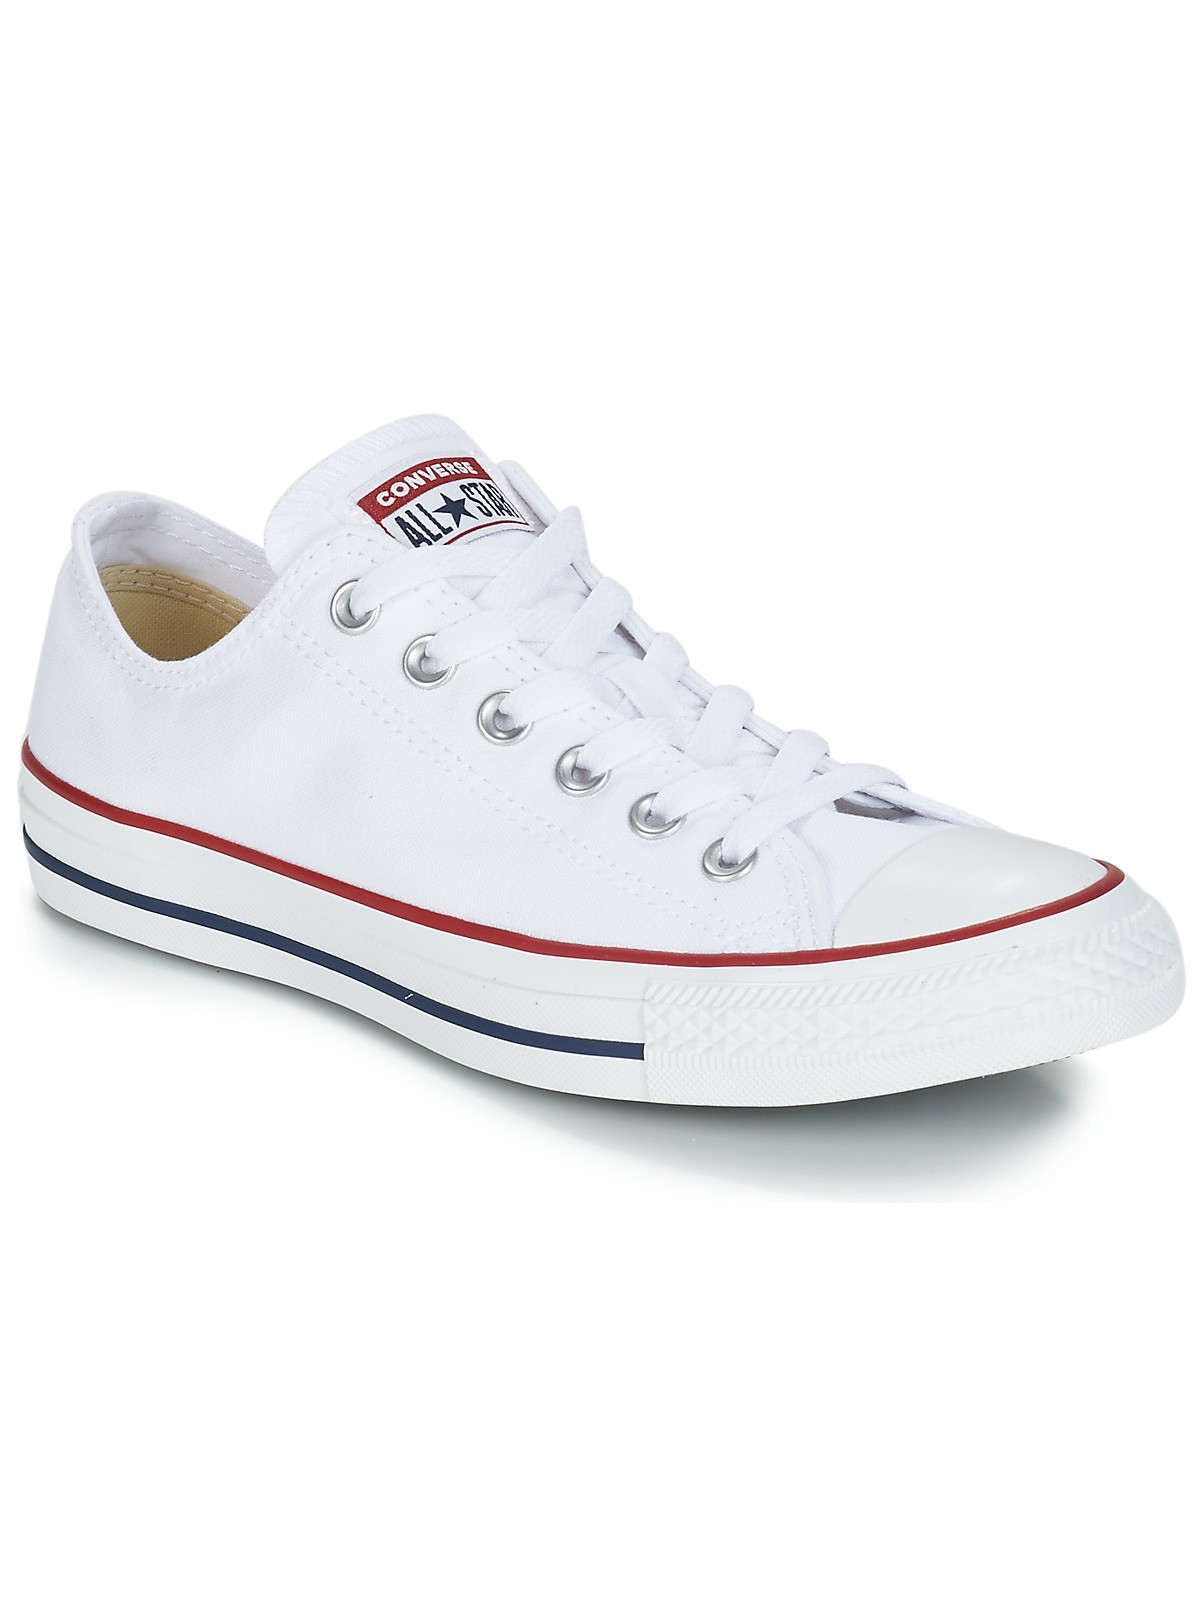 Lada worstelen middag Converse Chuck Taylor all star toile basse blanc - Basse - CONVERSE -  Marques